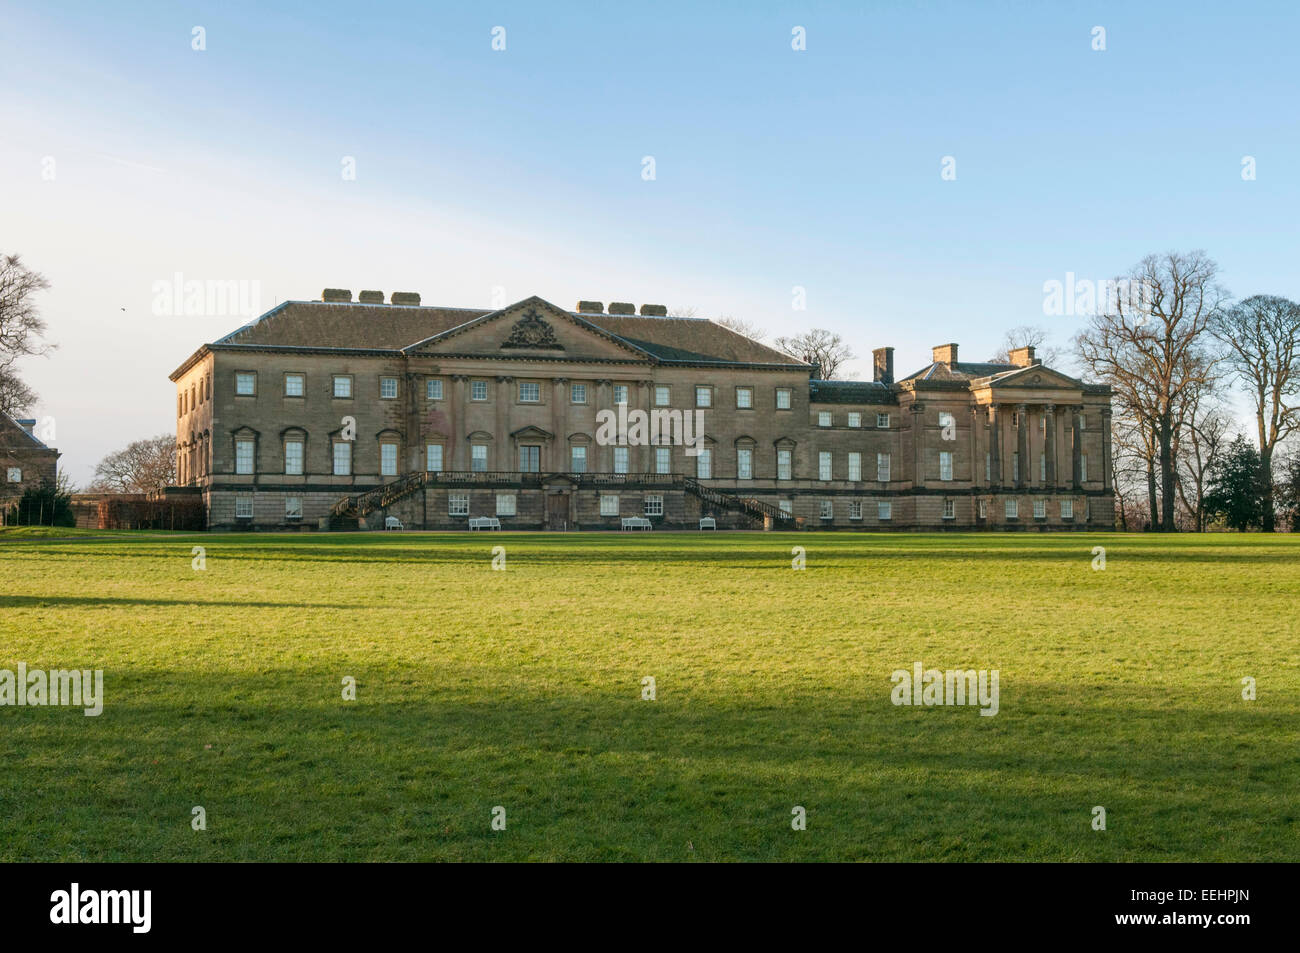 Nostell Priory; front viewed from approach path Stock Photo